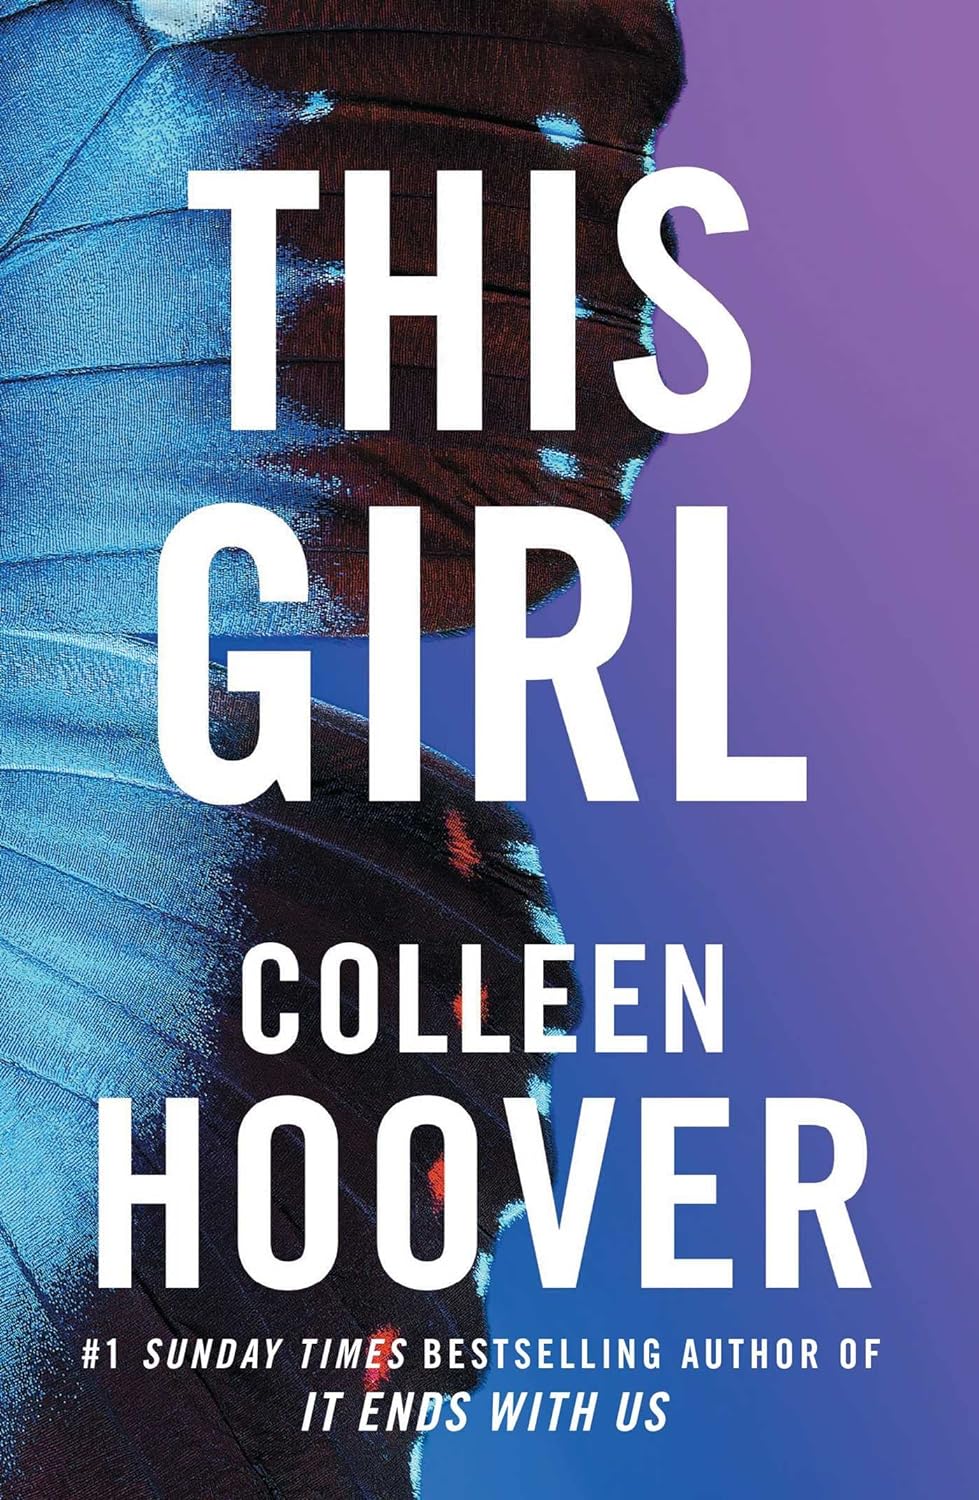 Sách Ngoại Văn - This Girl (Paperback by Colleen Hoover (Author))